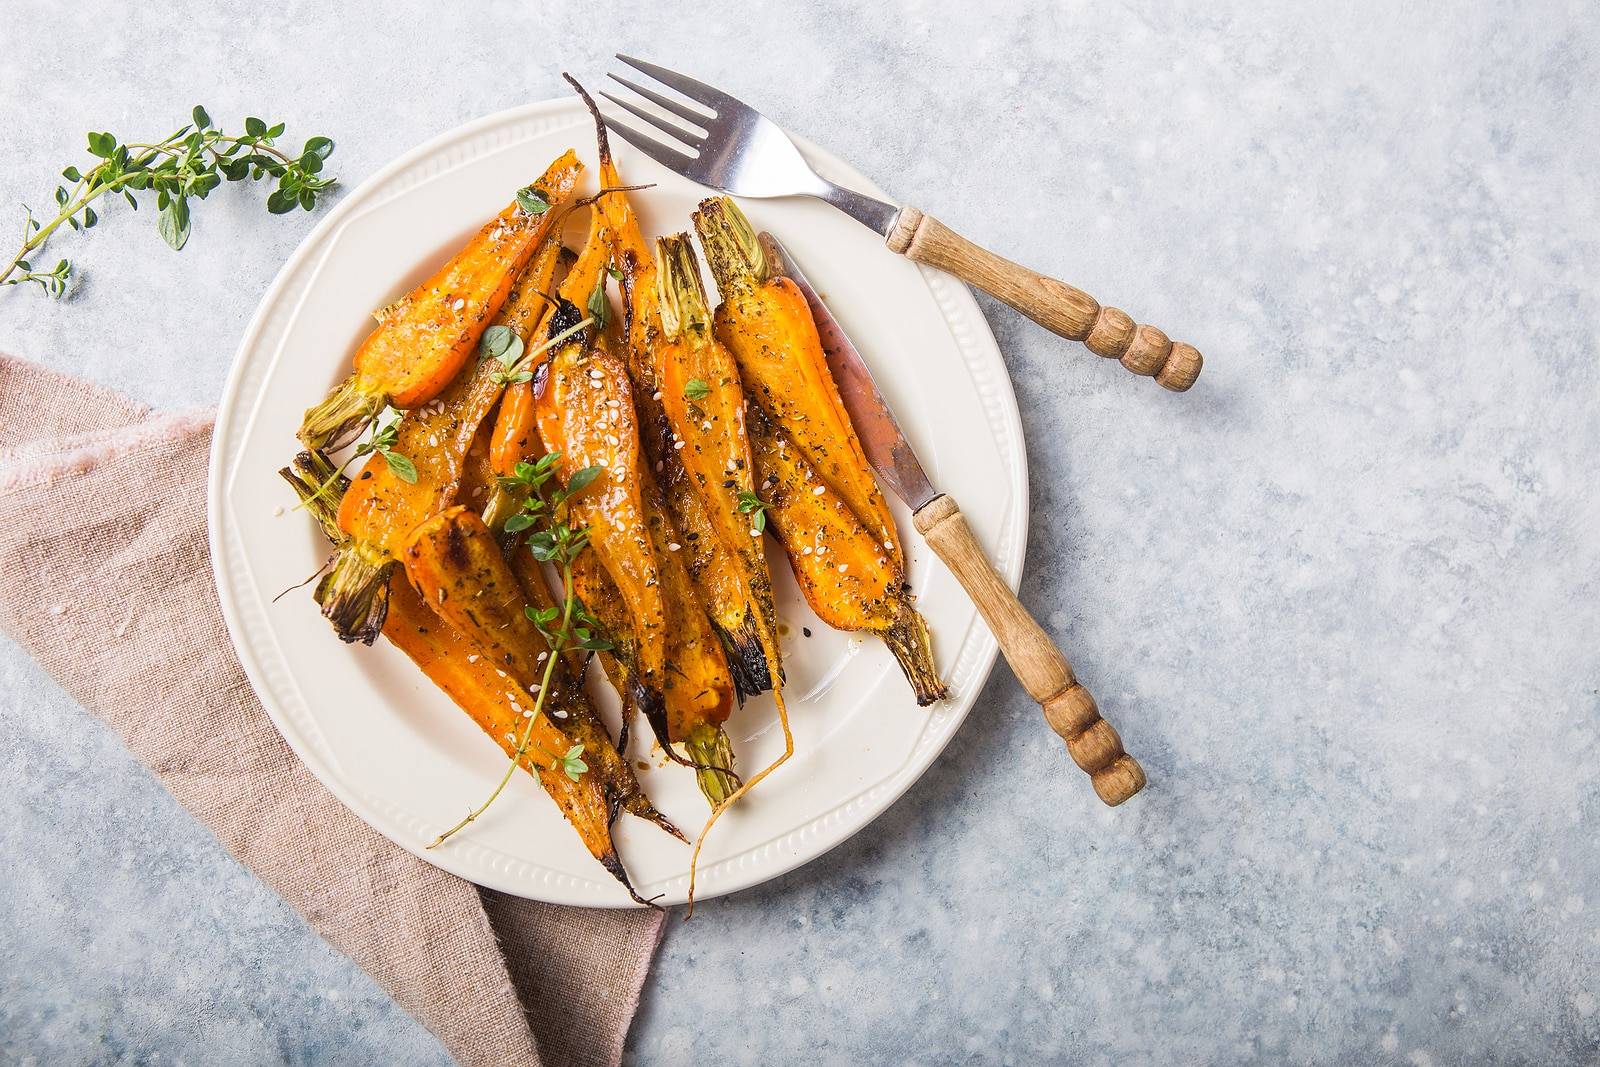 Plant-Based Lifestyle with Roasted Carrots with Macadamia Nuts